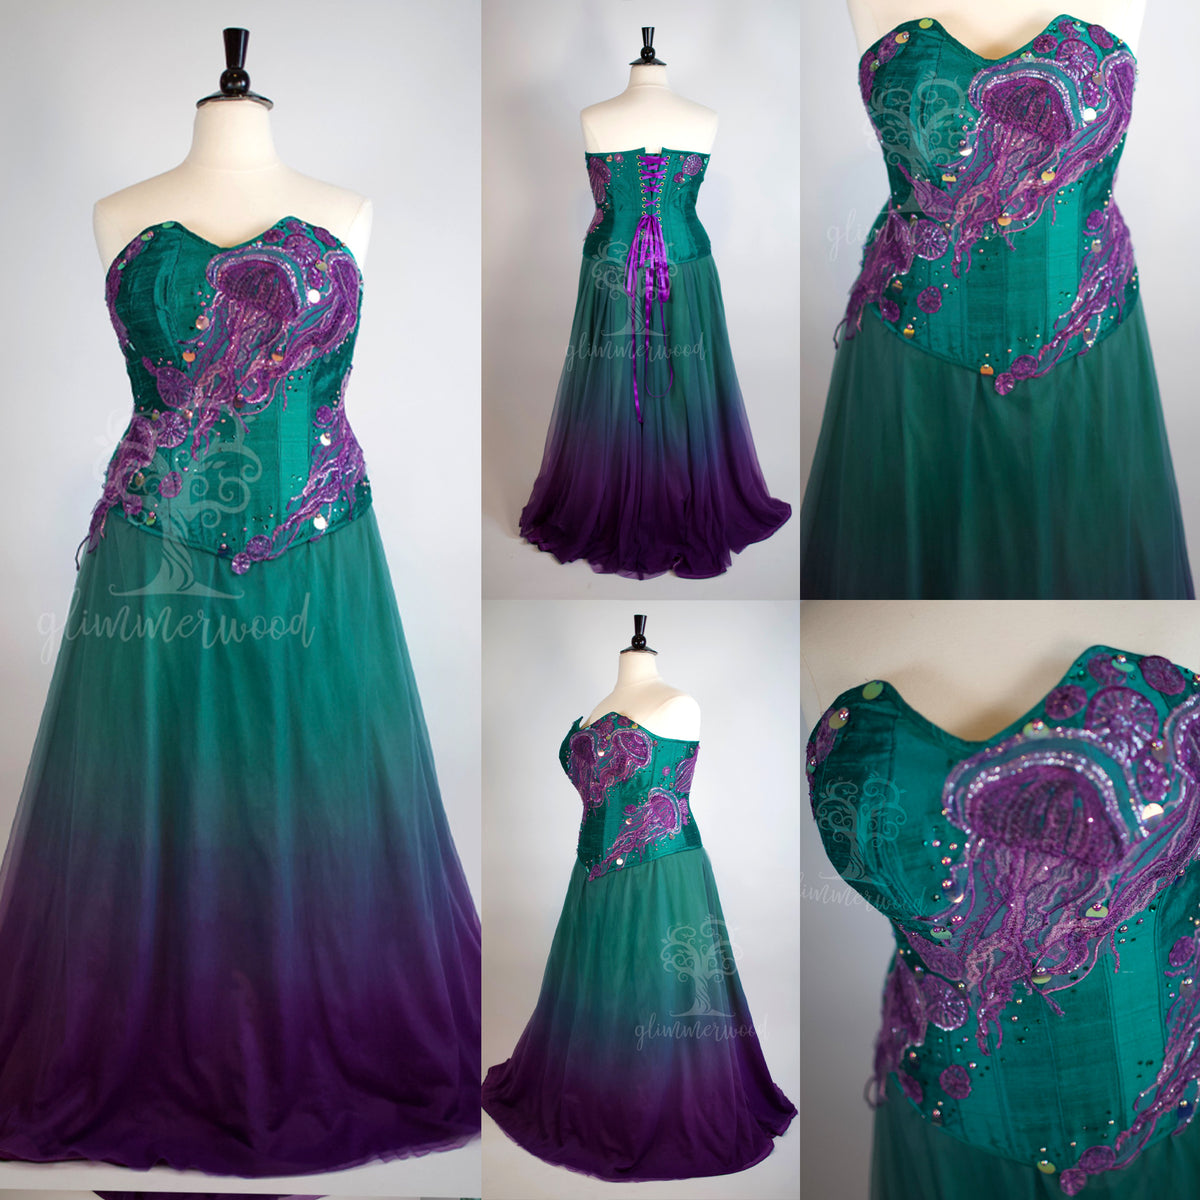 Custom Jellyfish Gown - Made to Order